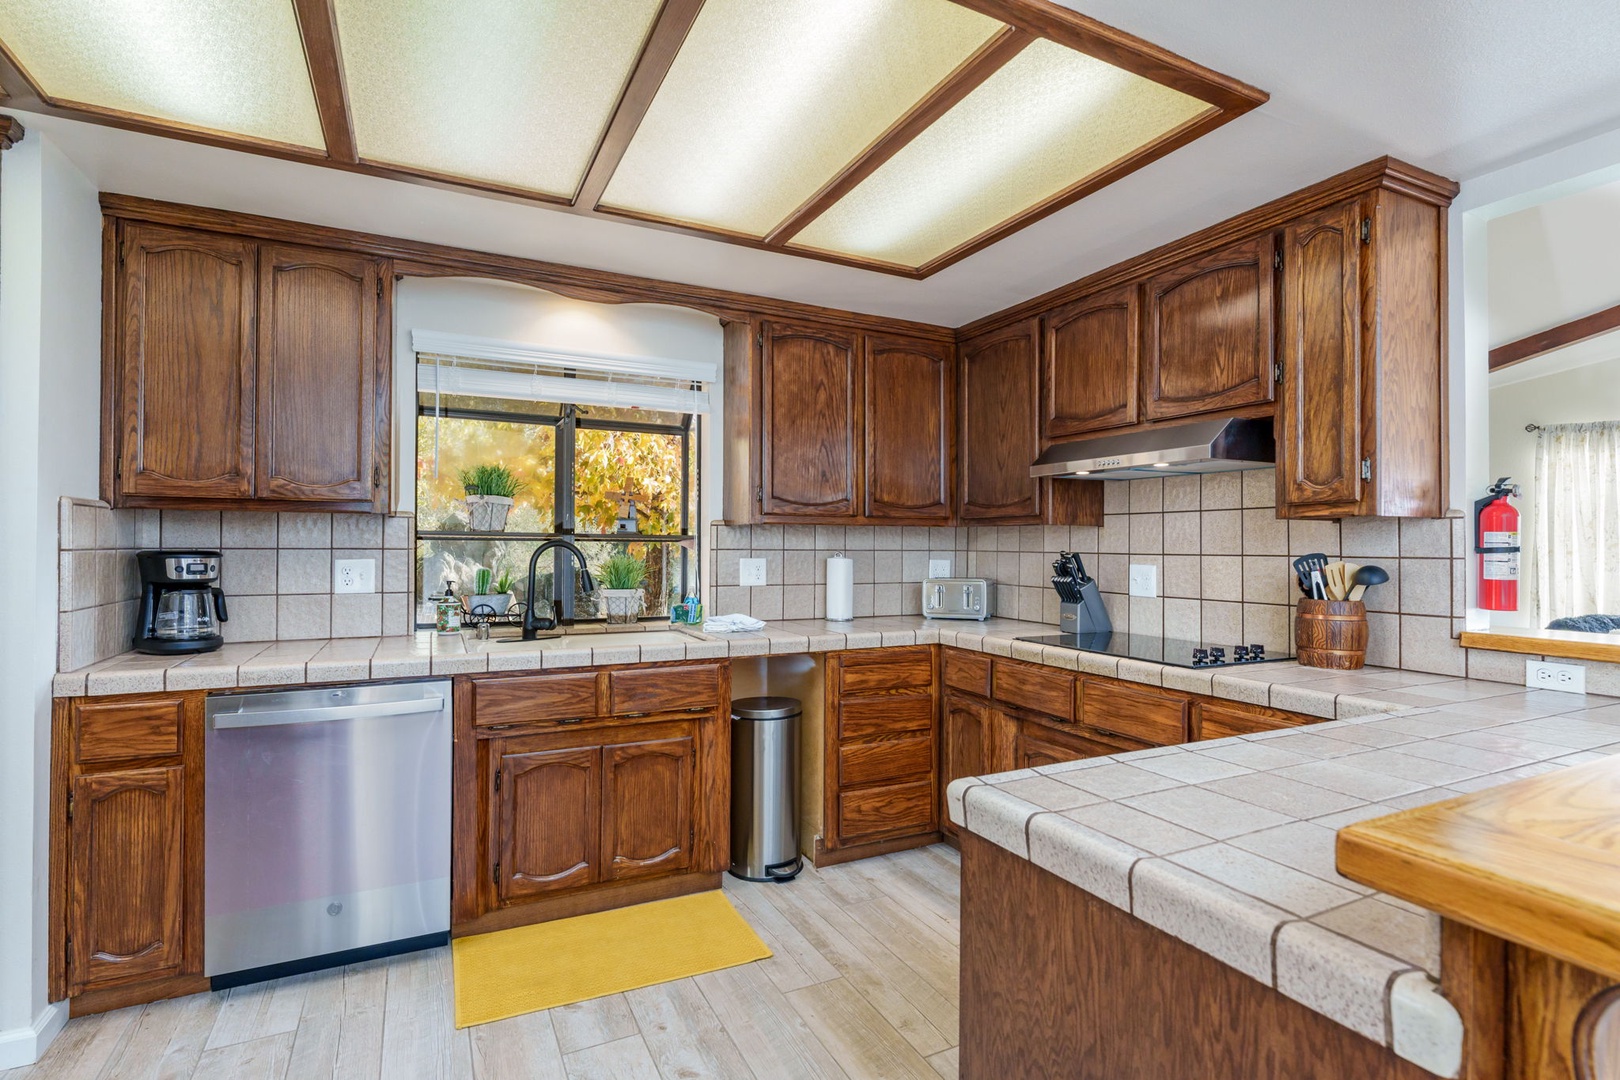 The large kitchen is well equipped and offers ample counter and storage space